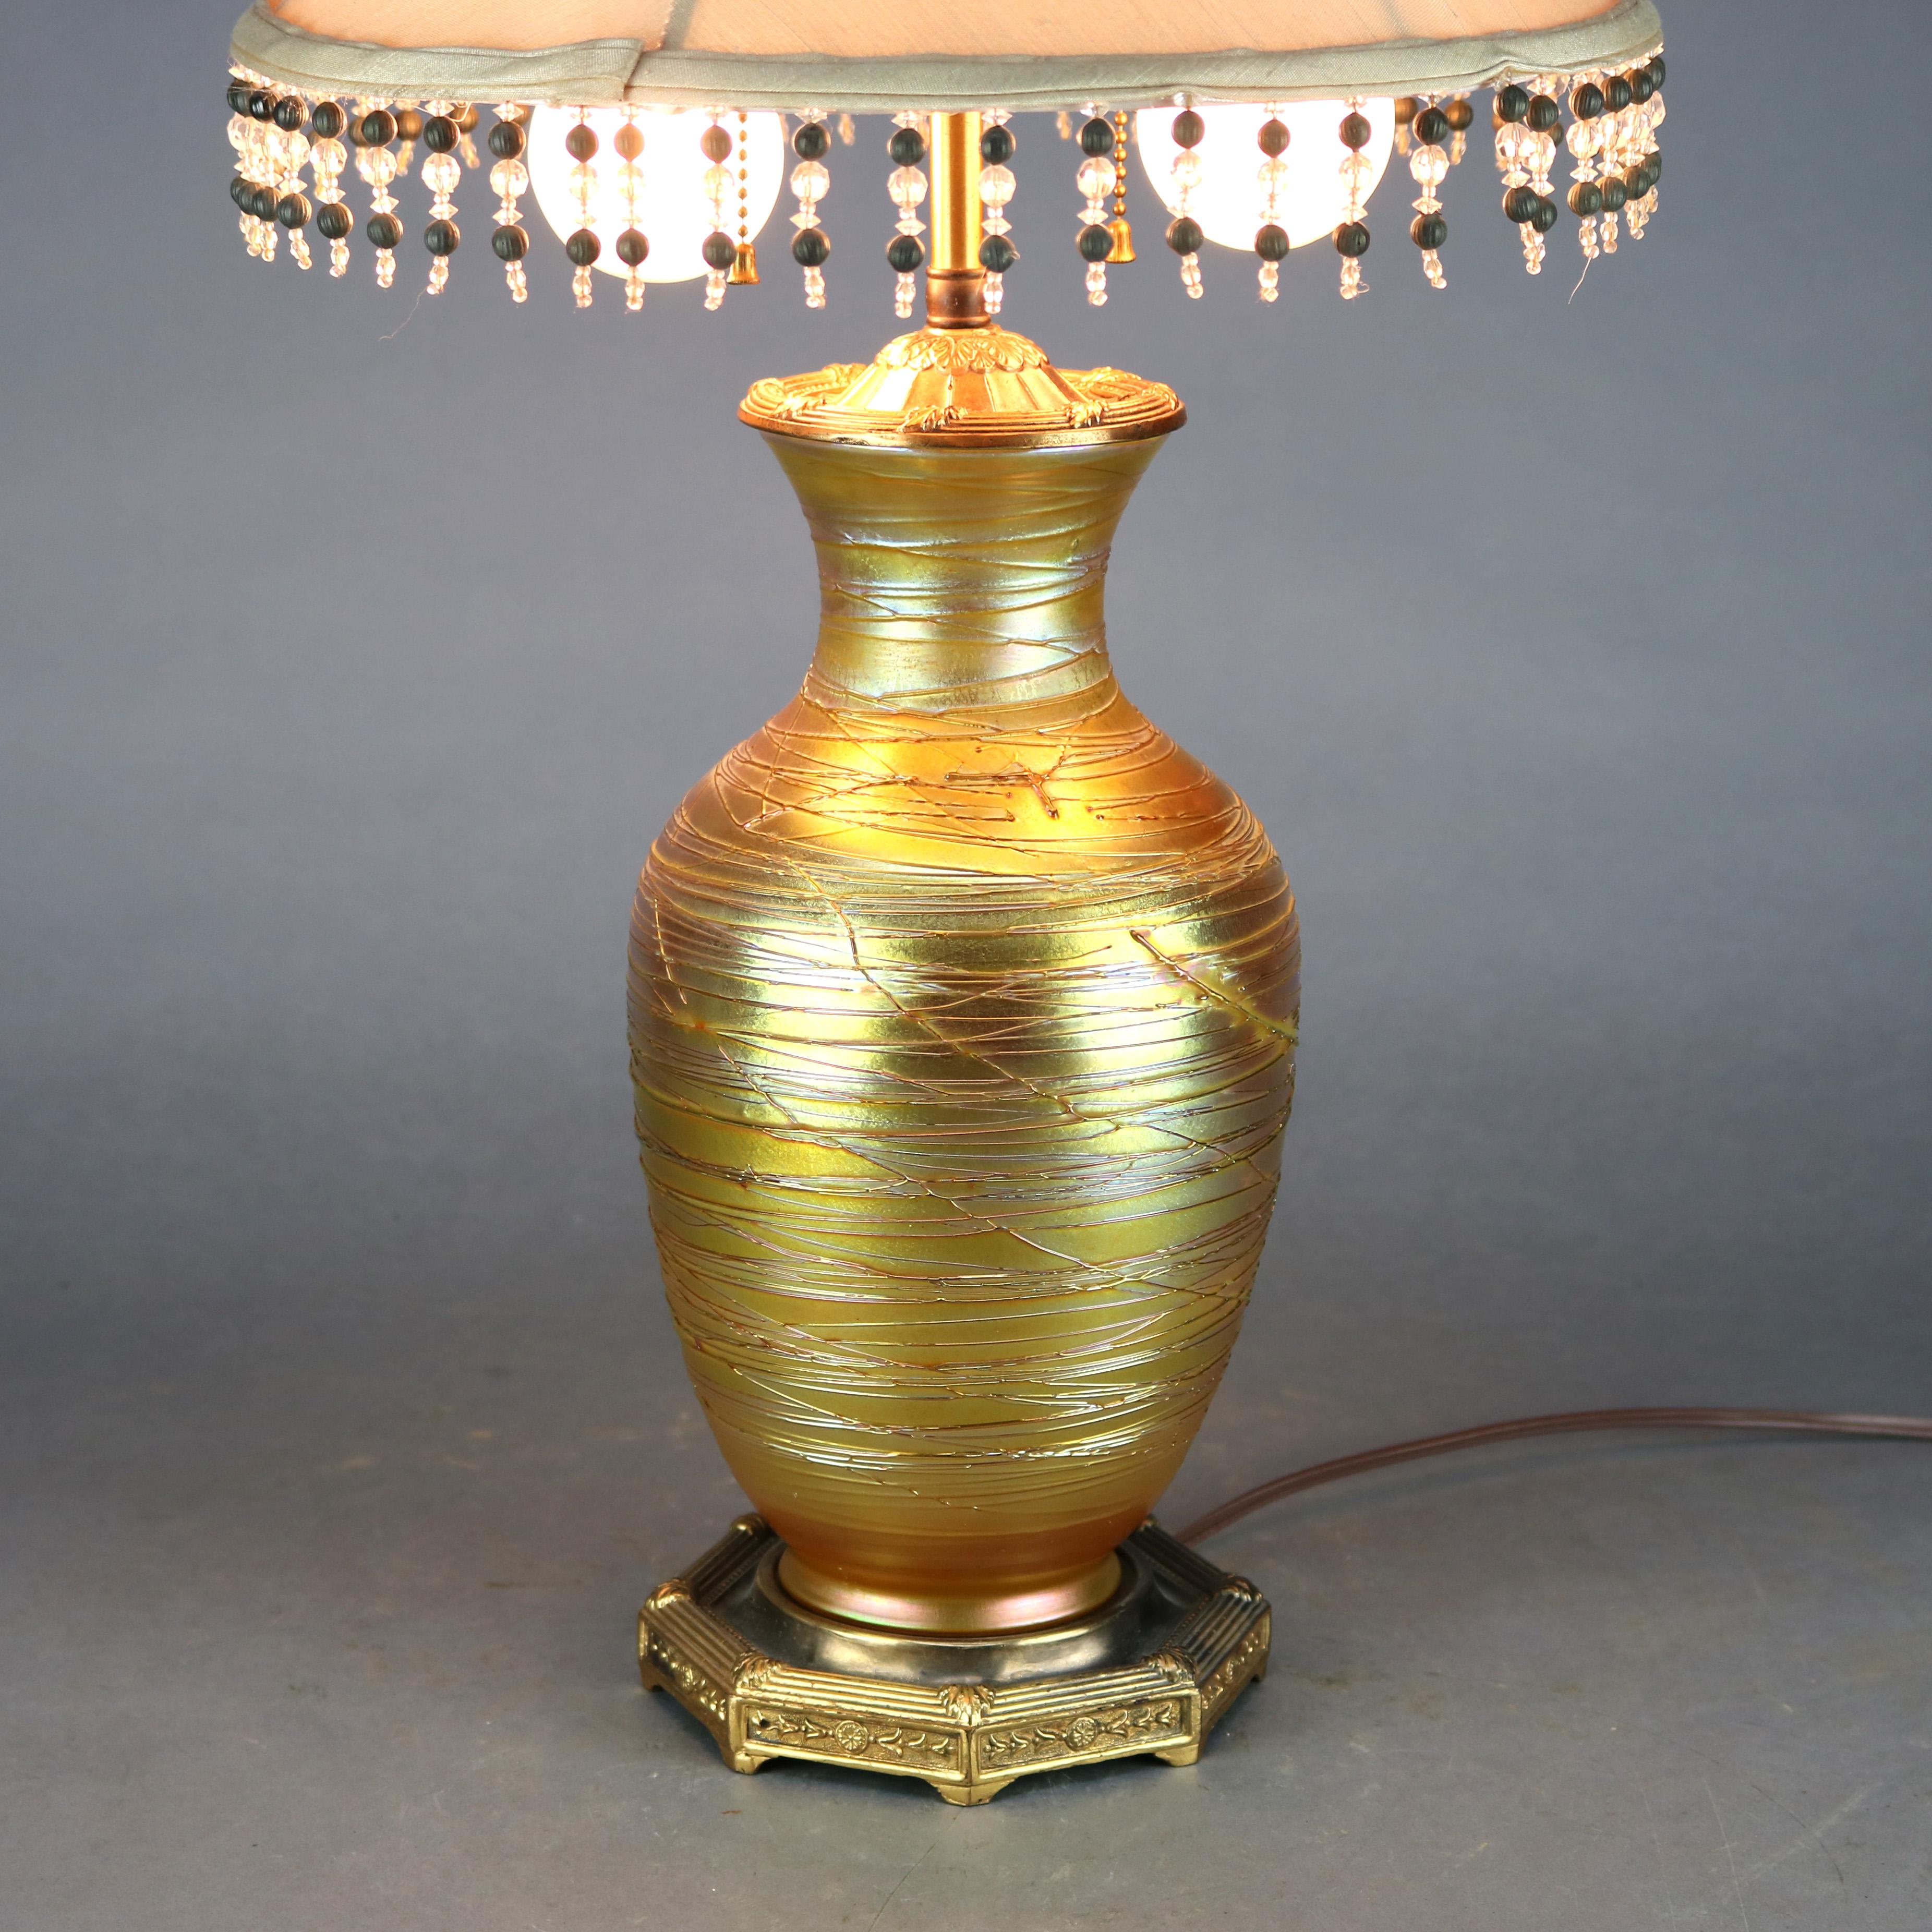 An antique double socket table lamp offers art glass string vase attributed to Durand with slip trail threading and gold aurene finish mounted on faceted cast brass base, also having elements of Quezal, circa 1920. This item was not disassembled to